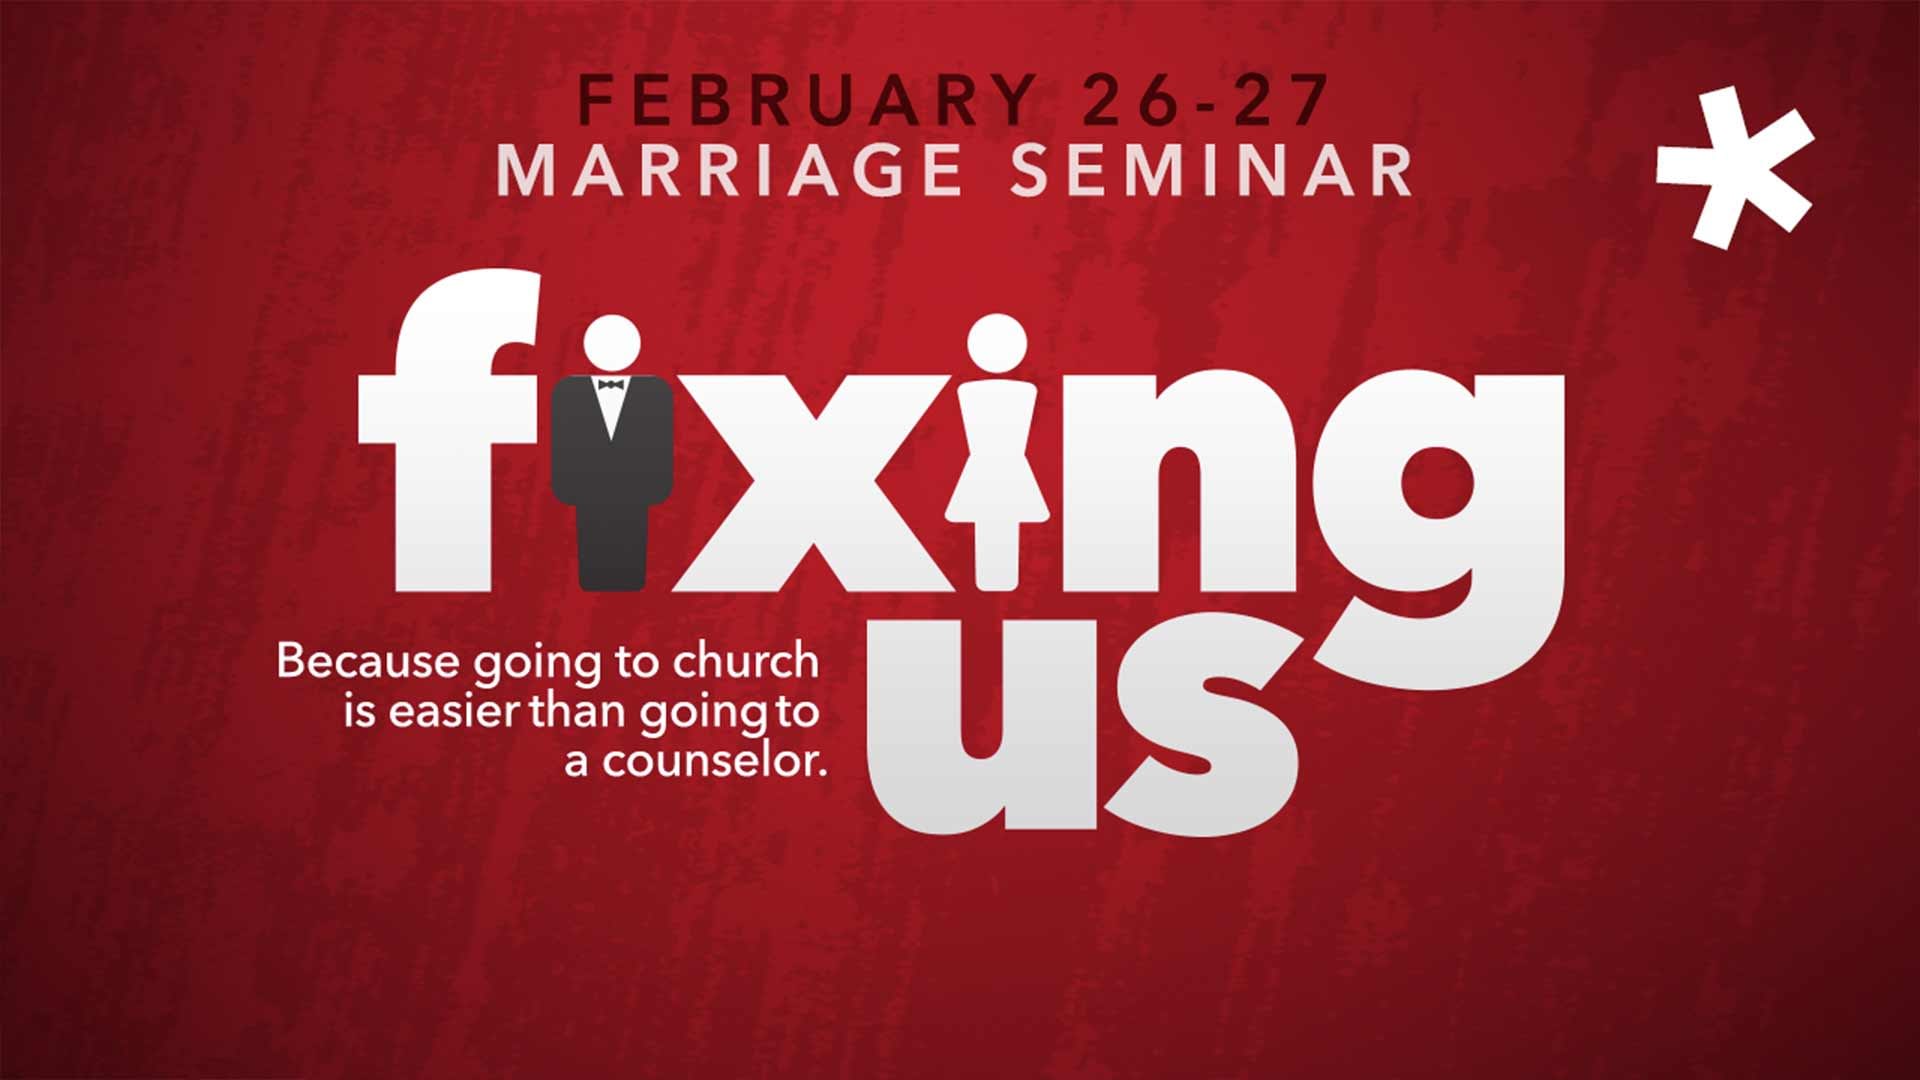 Fixing Us. Because going to church is easier than going to a counselor.